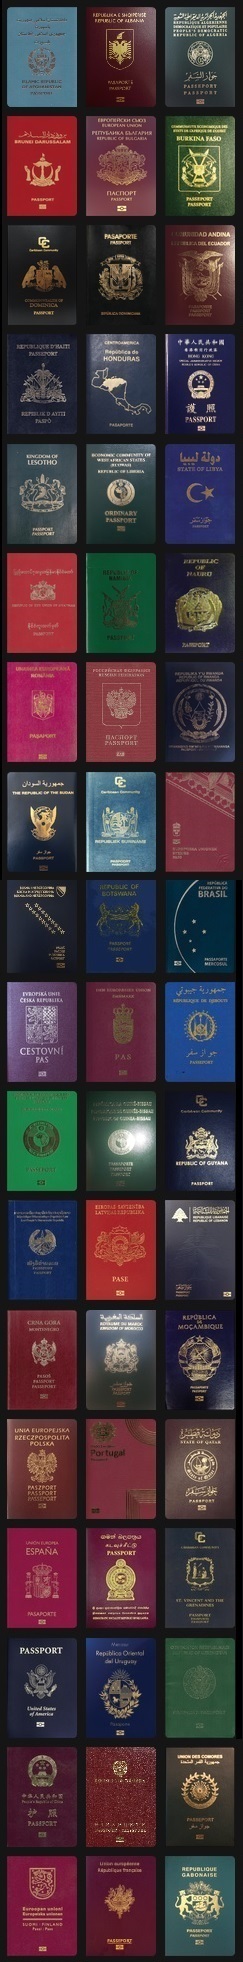 The strongest passport in the world